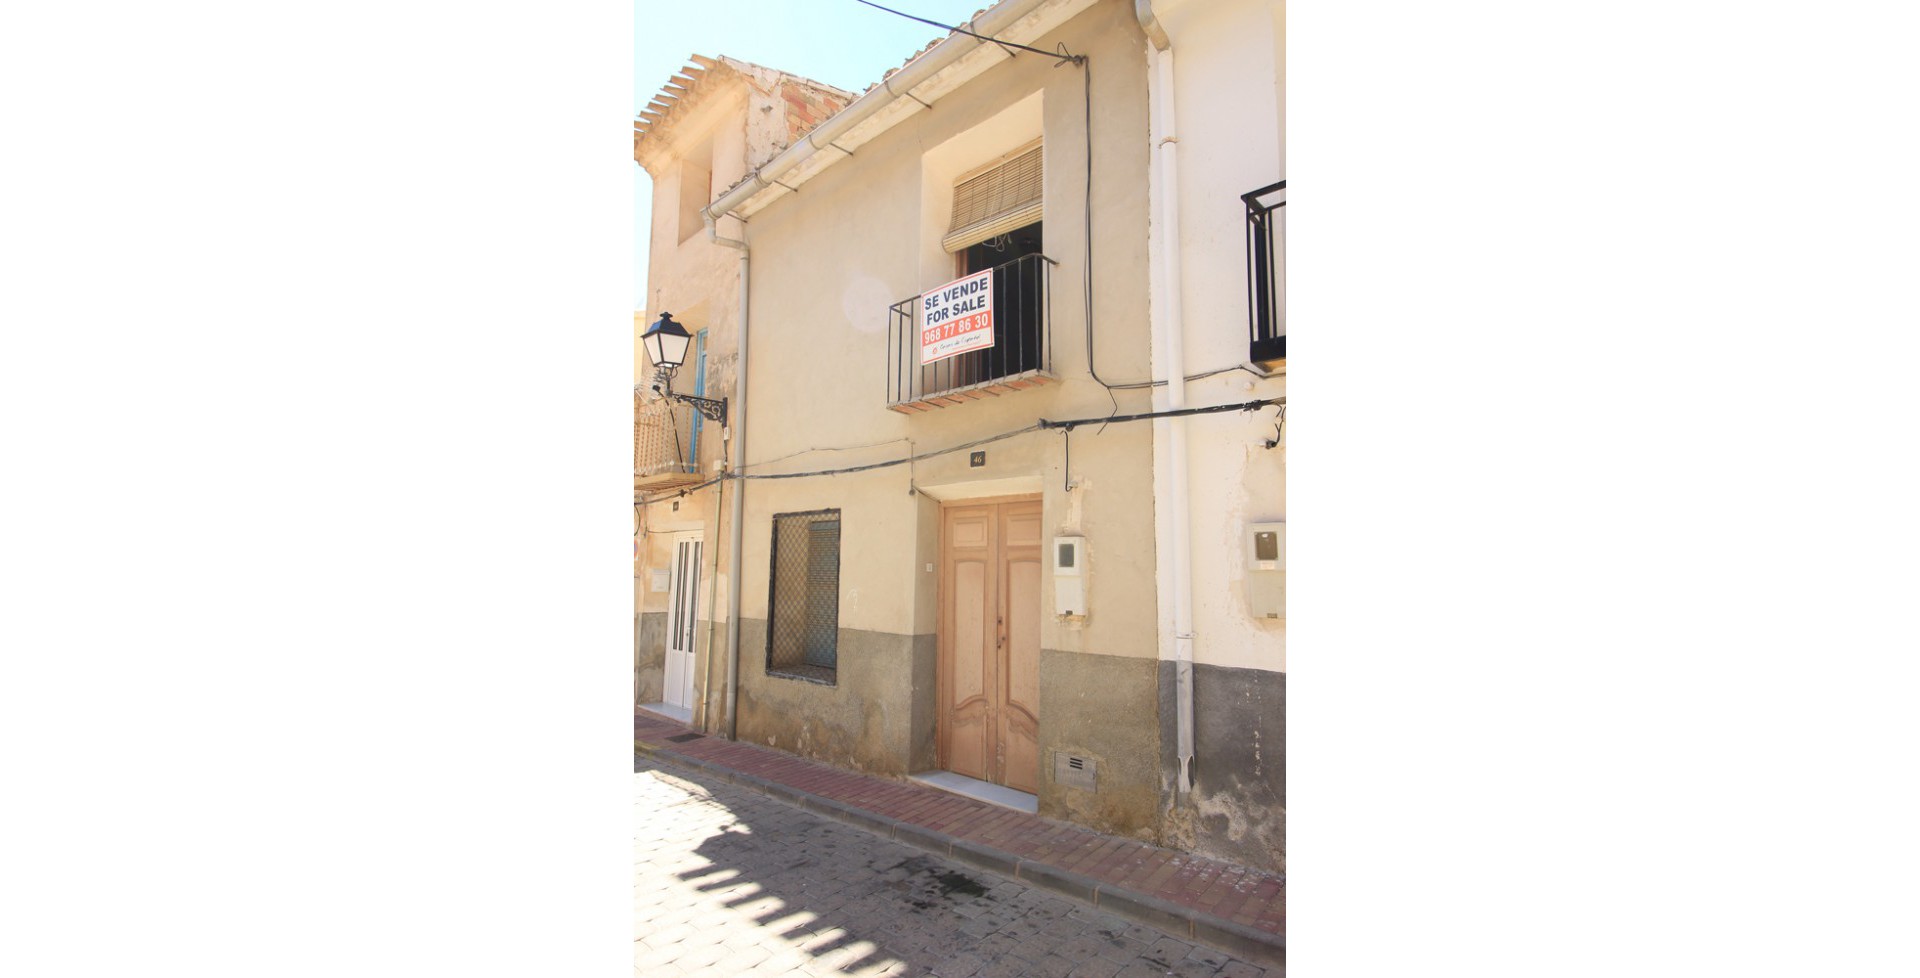 Large traditional town house with views, Ricote, Murcia, Spain